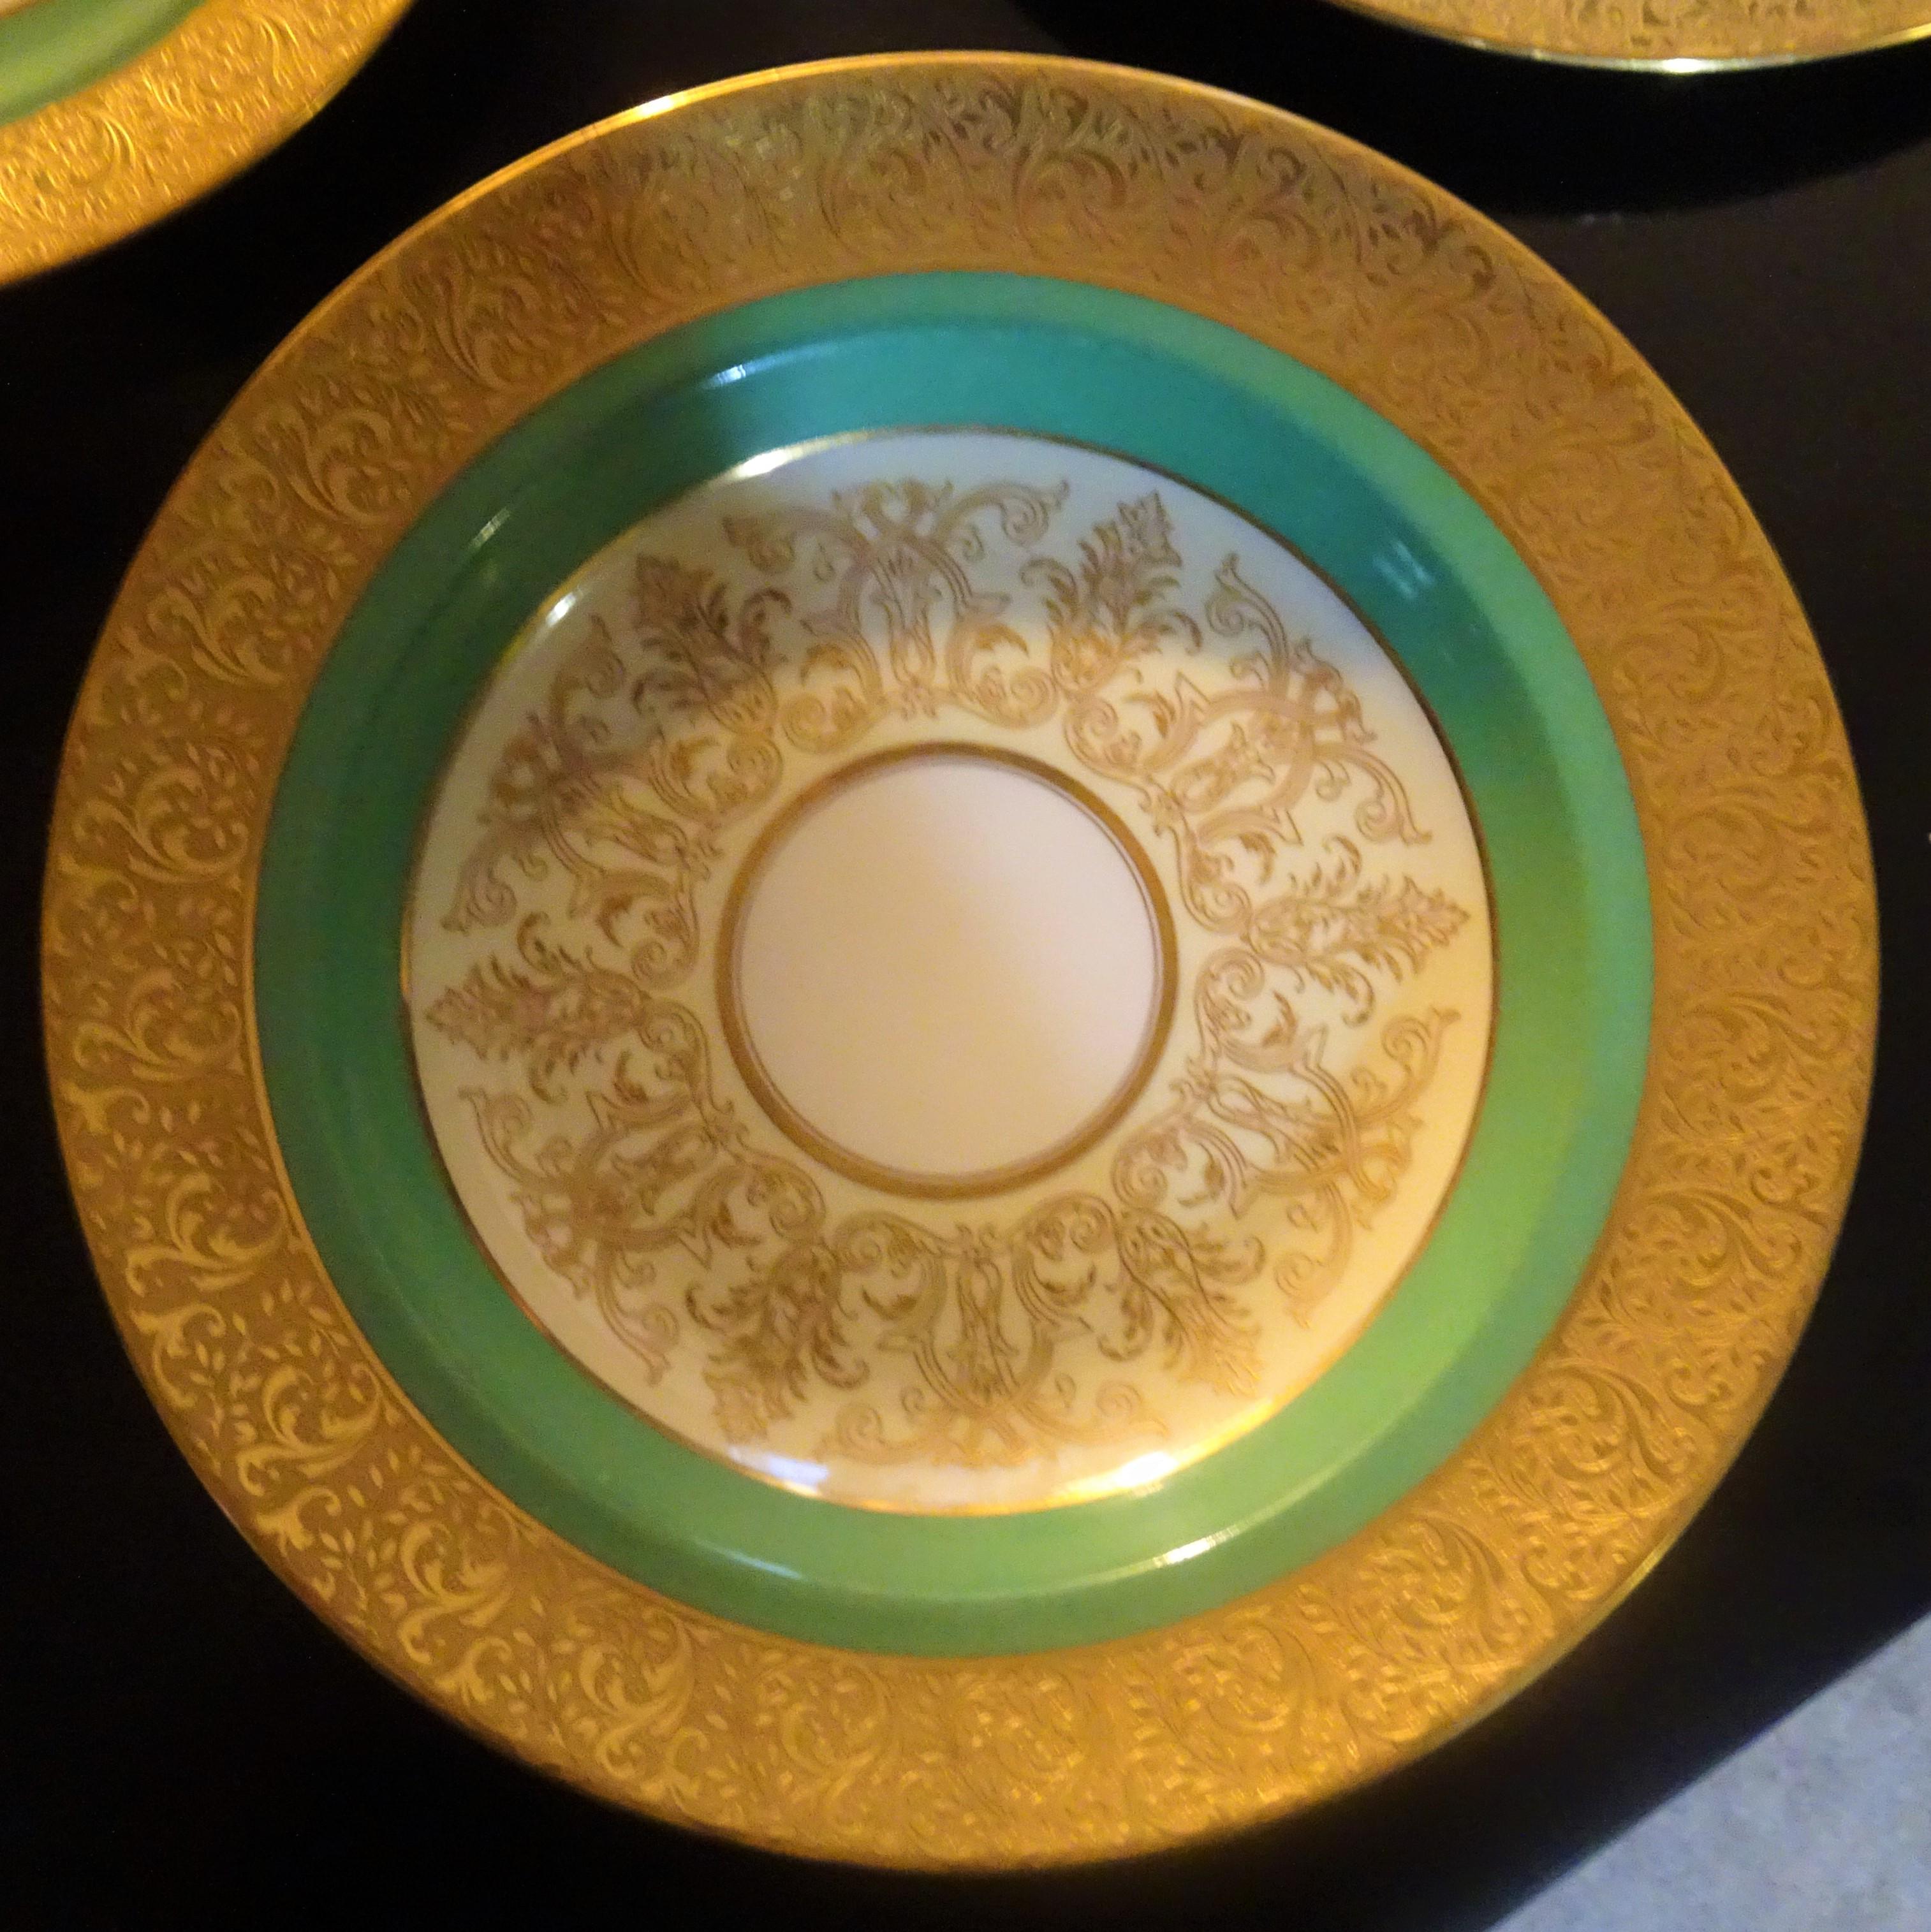 This set of hand-decorated Limoges porcelain consists of four dinner plates (10.5